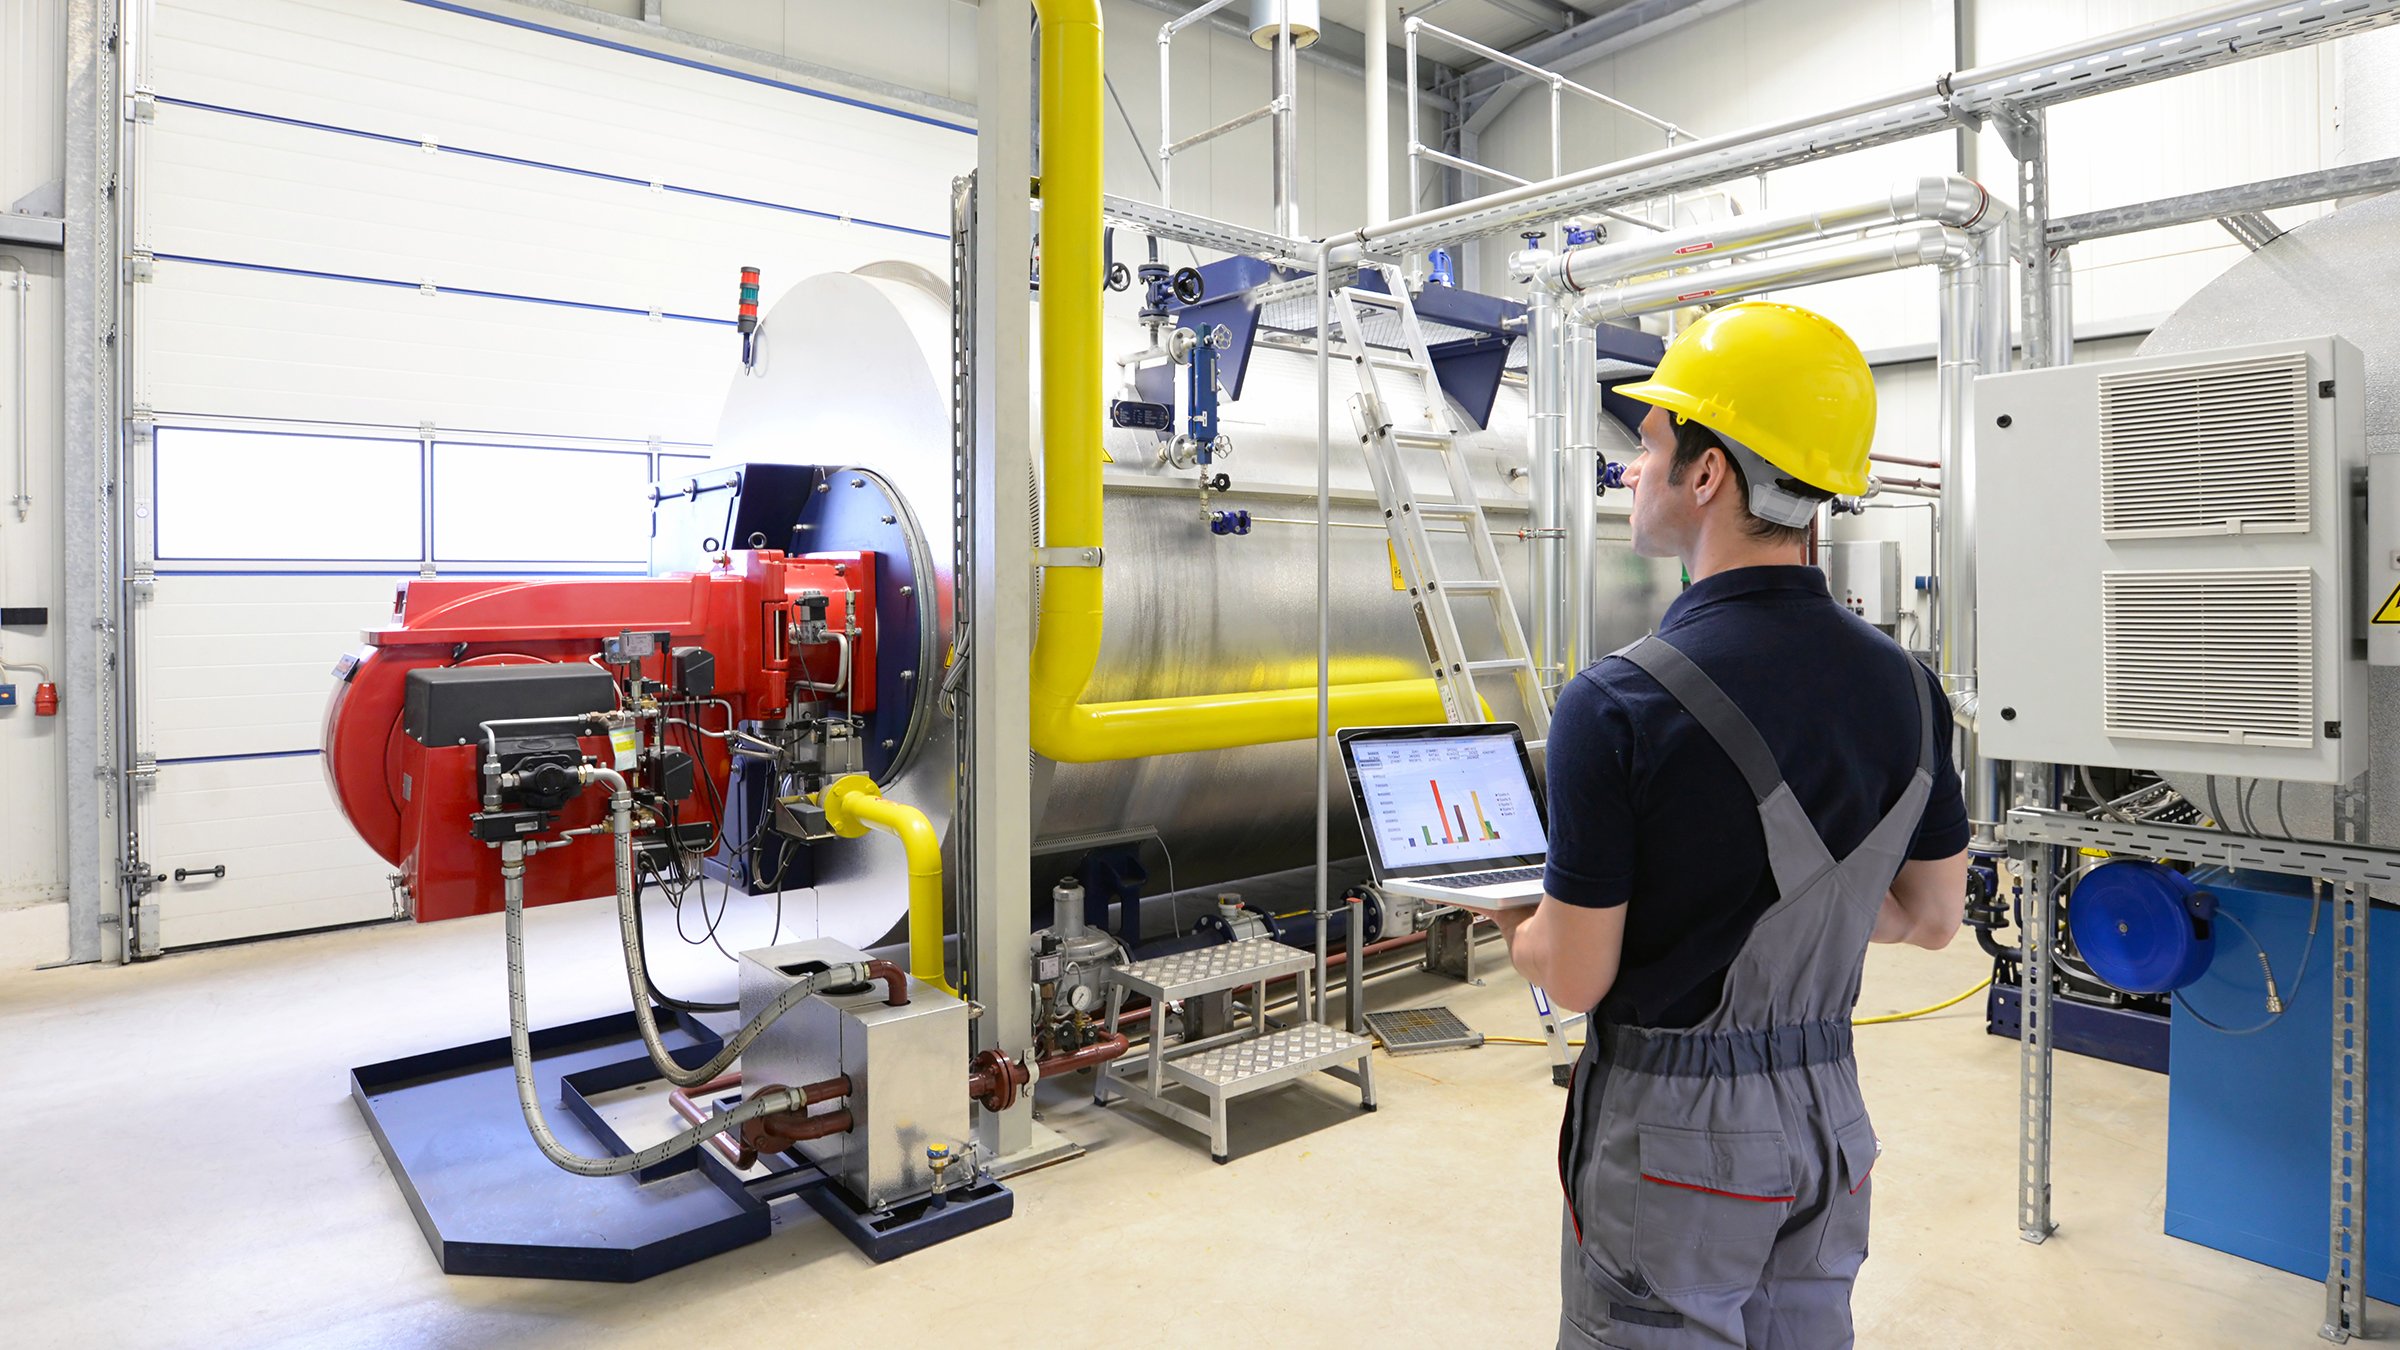 A male worker in yellow hard hat uses modern technology to monitor systems in an industrial manufacturing environment. Worker in an industrial plant check the systems with modern technology